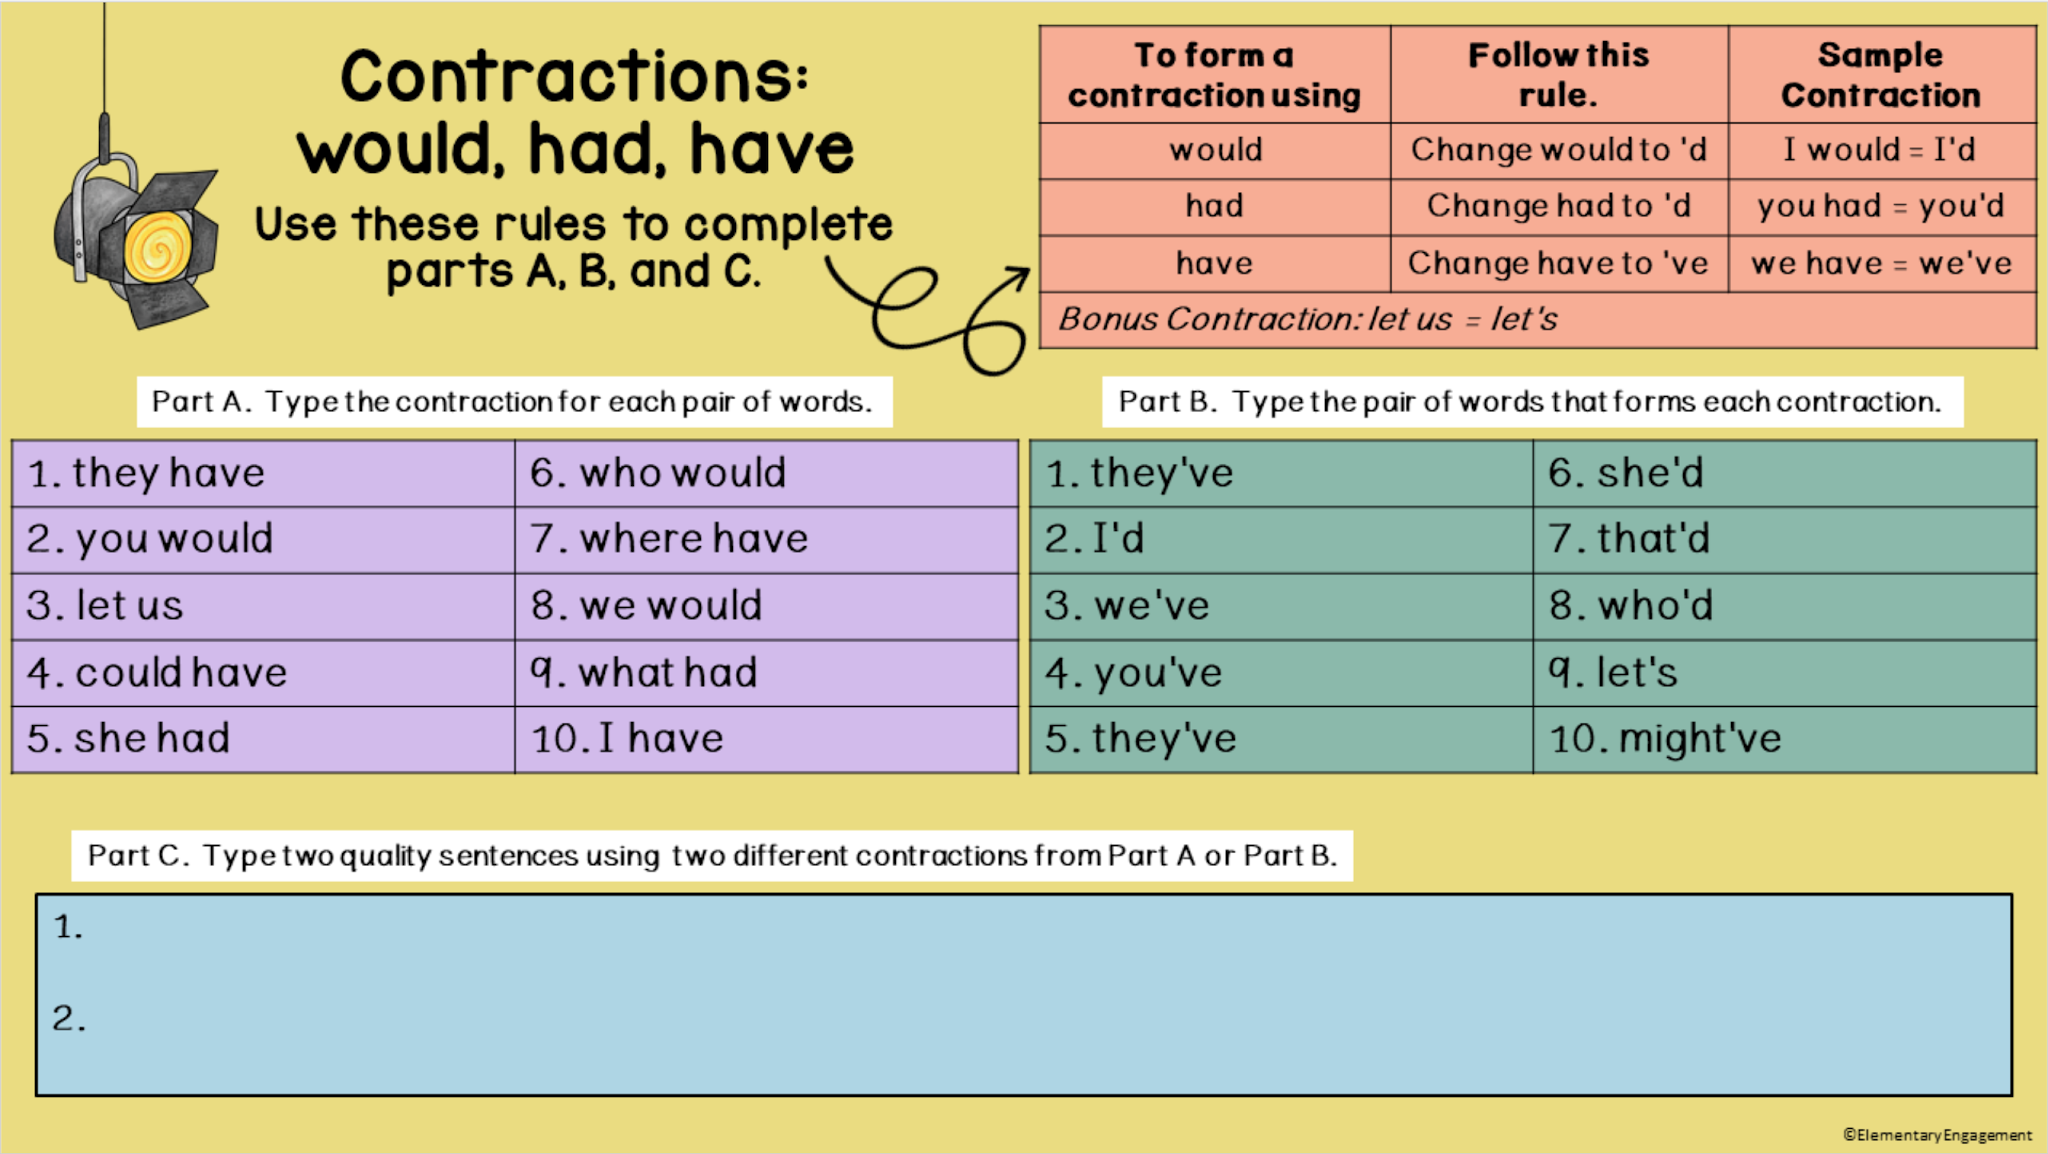 Awesome resources for contractions using Google Classroom